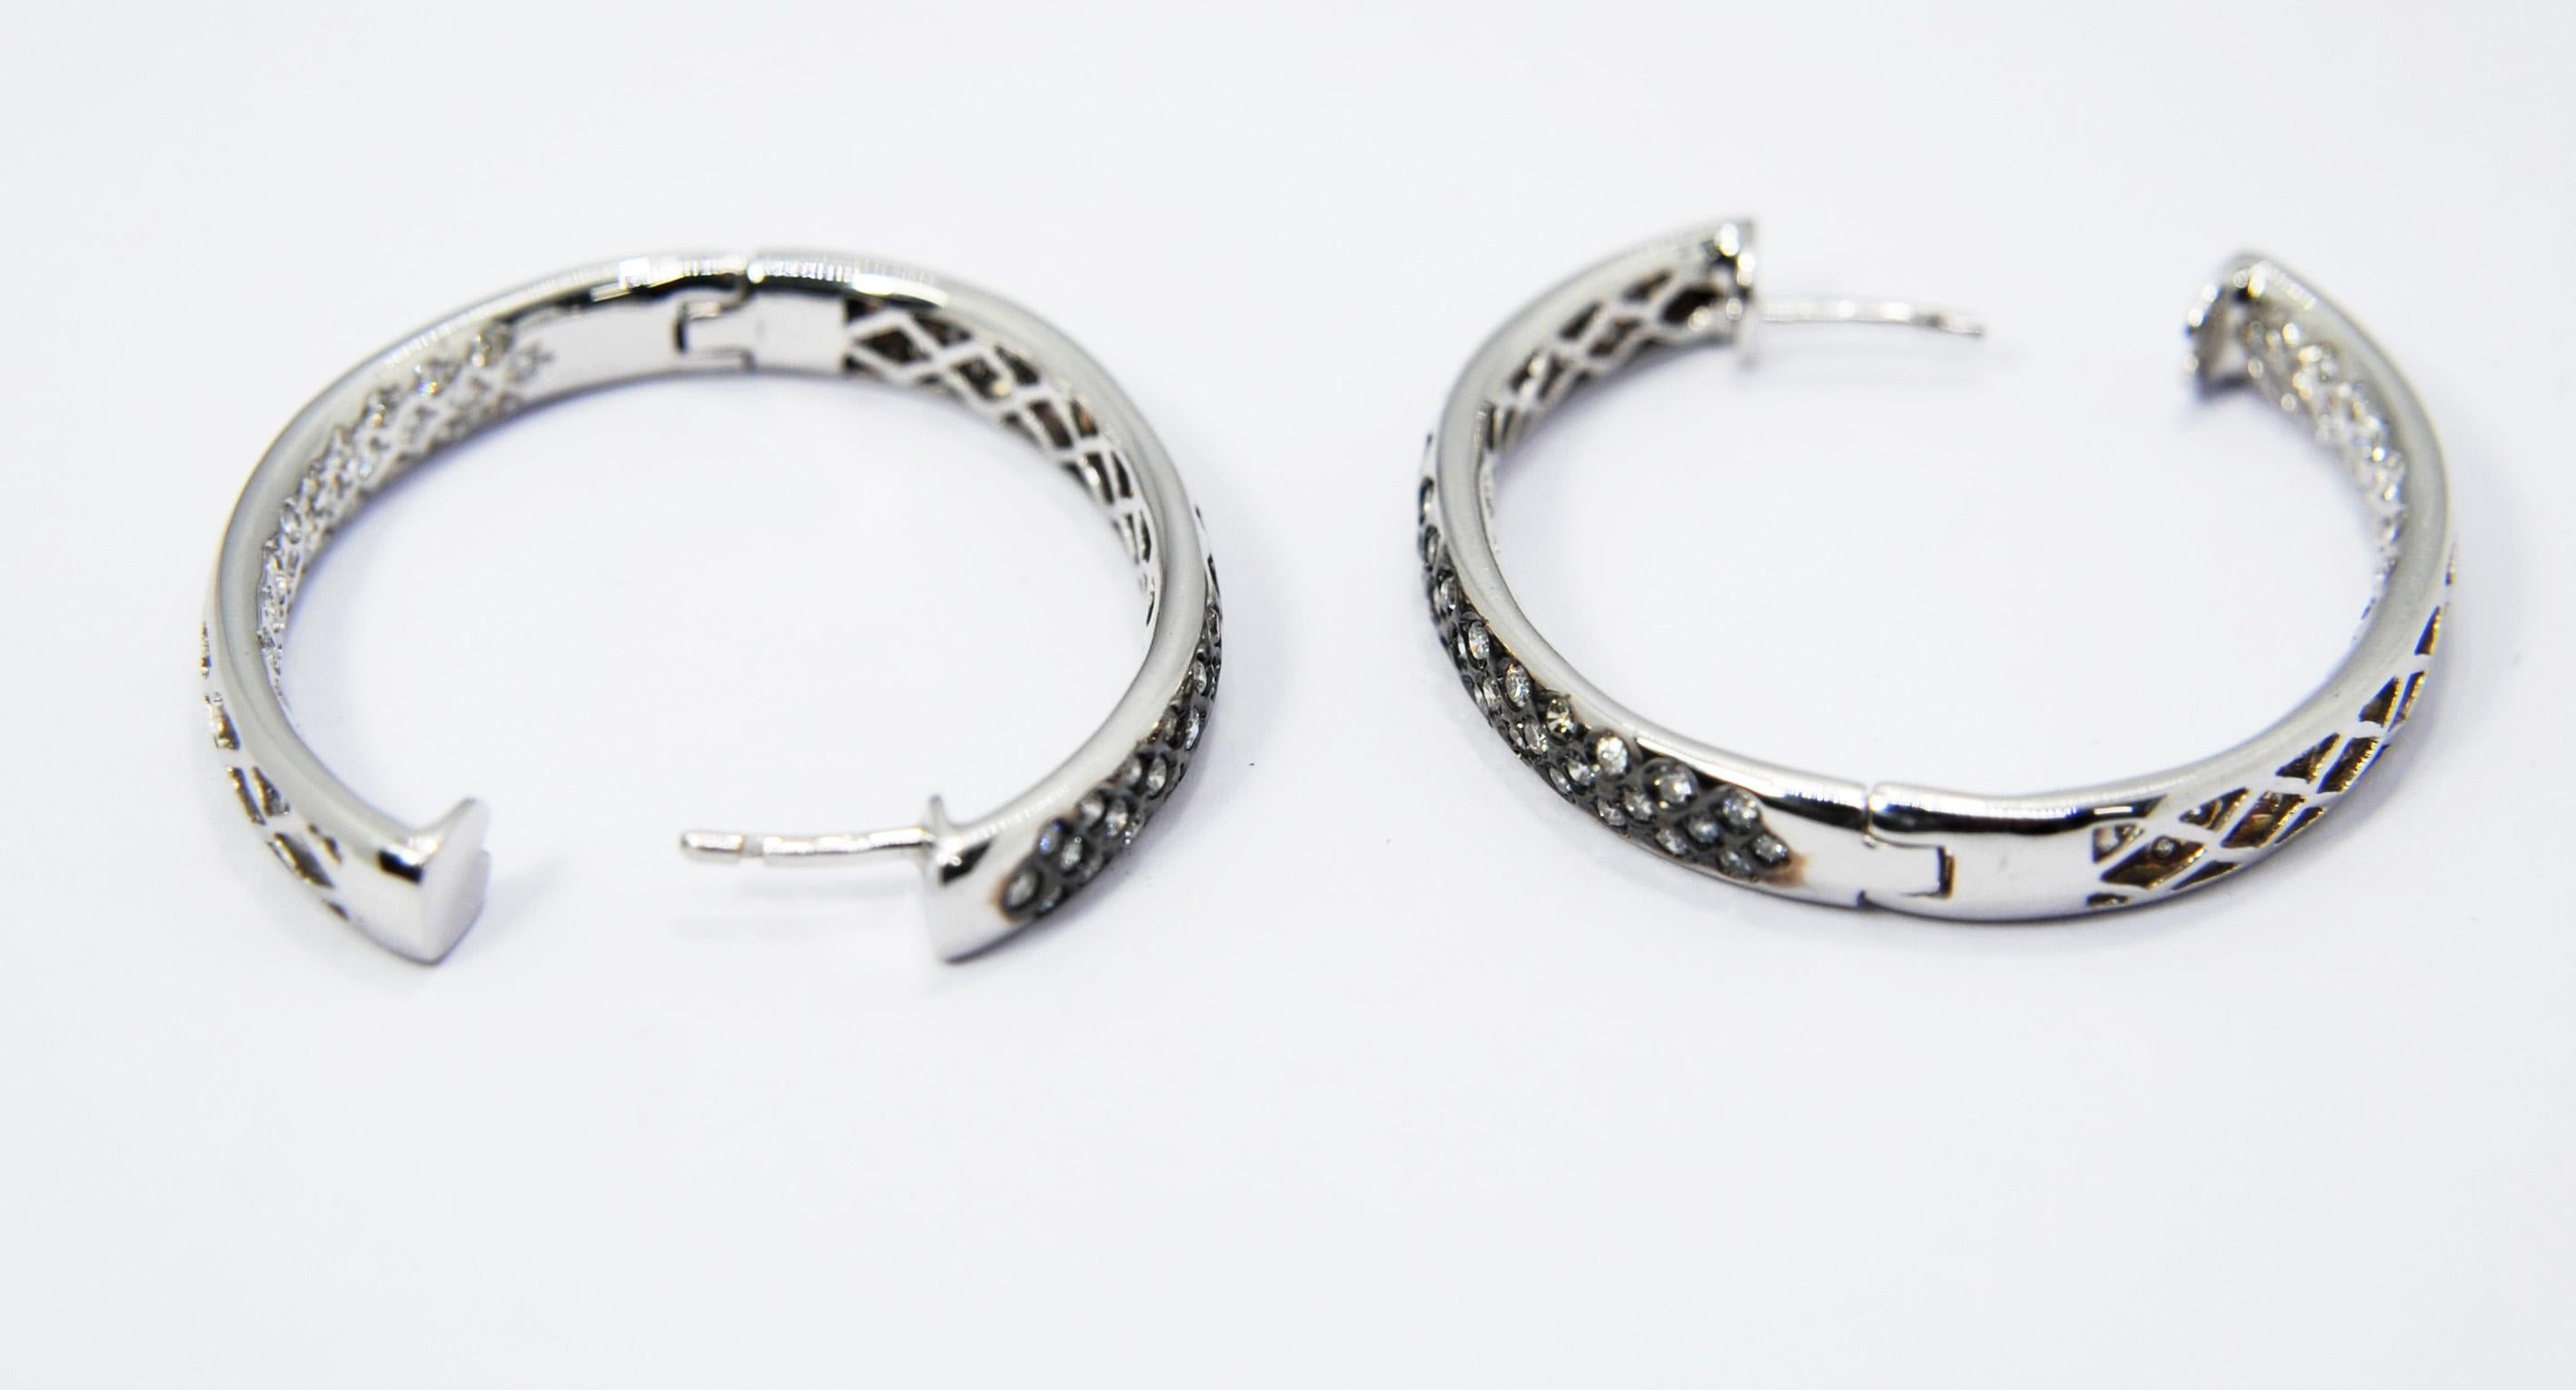 Irama Pradera is a Young designer from Spain that searches always for the best gems and combines classic with contemporary mounting and styles. 
Sleekly crafted in  18K white gold these romantic and classic pair of Hoop earrings consist on a pave